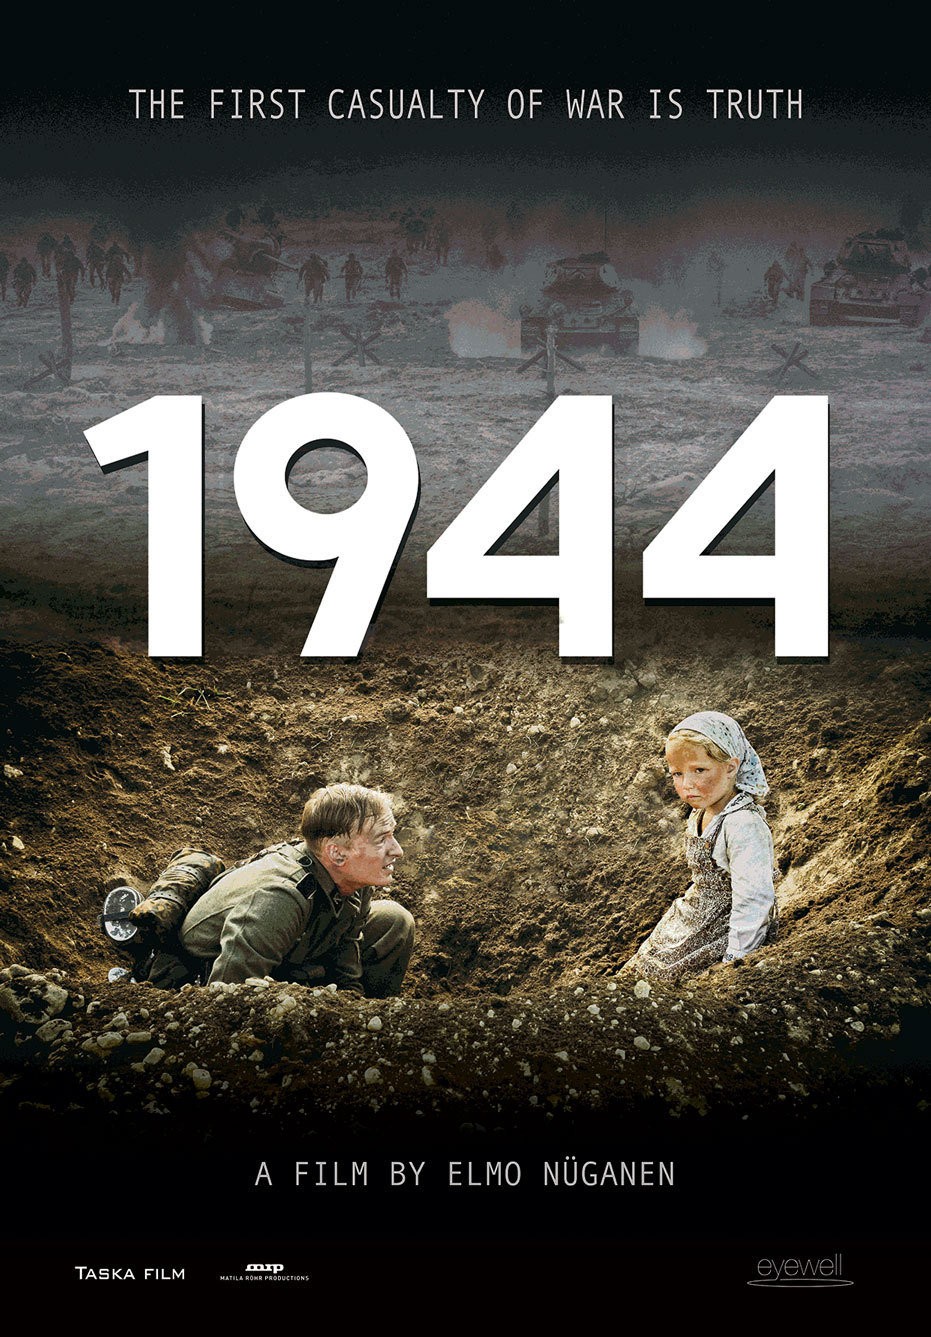 Extra Large Movie Poster Image for 1944 